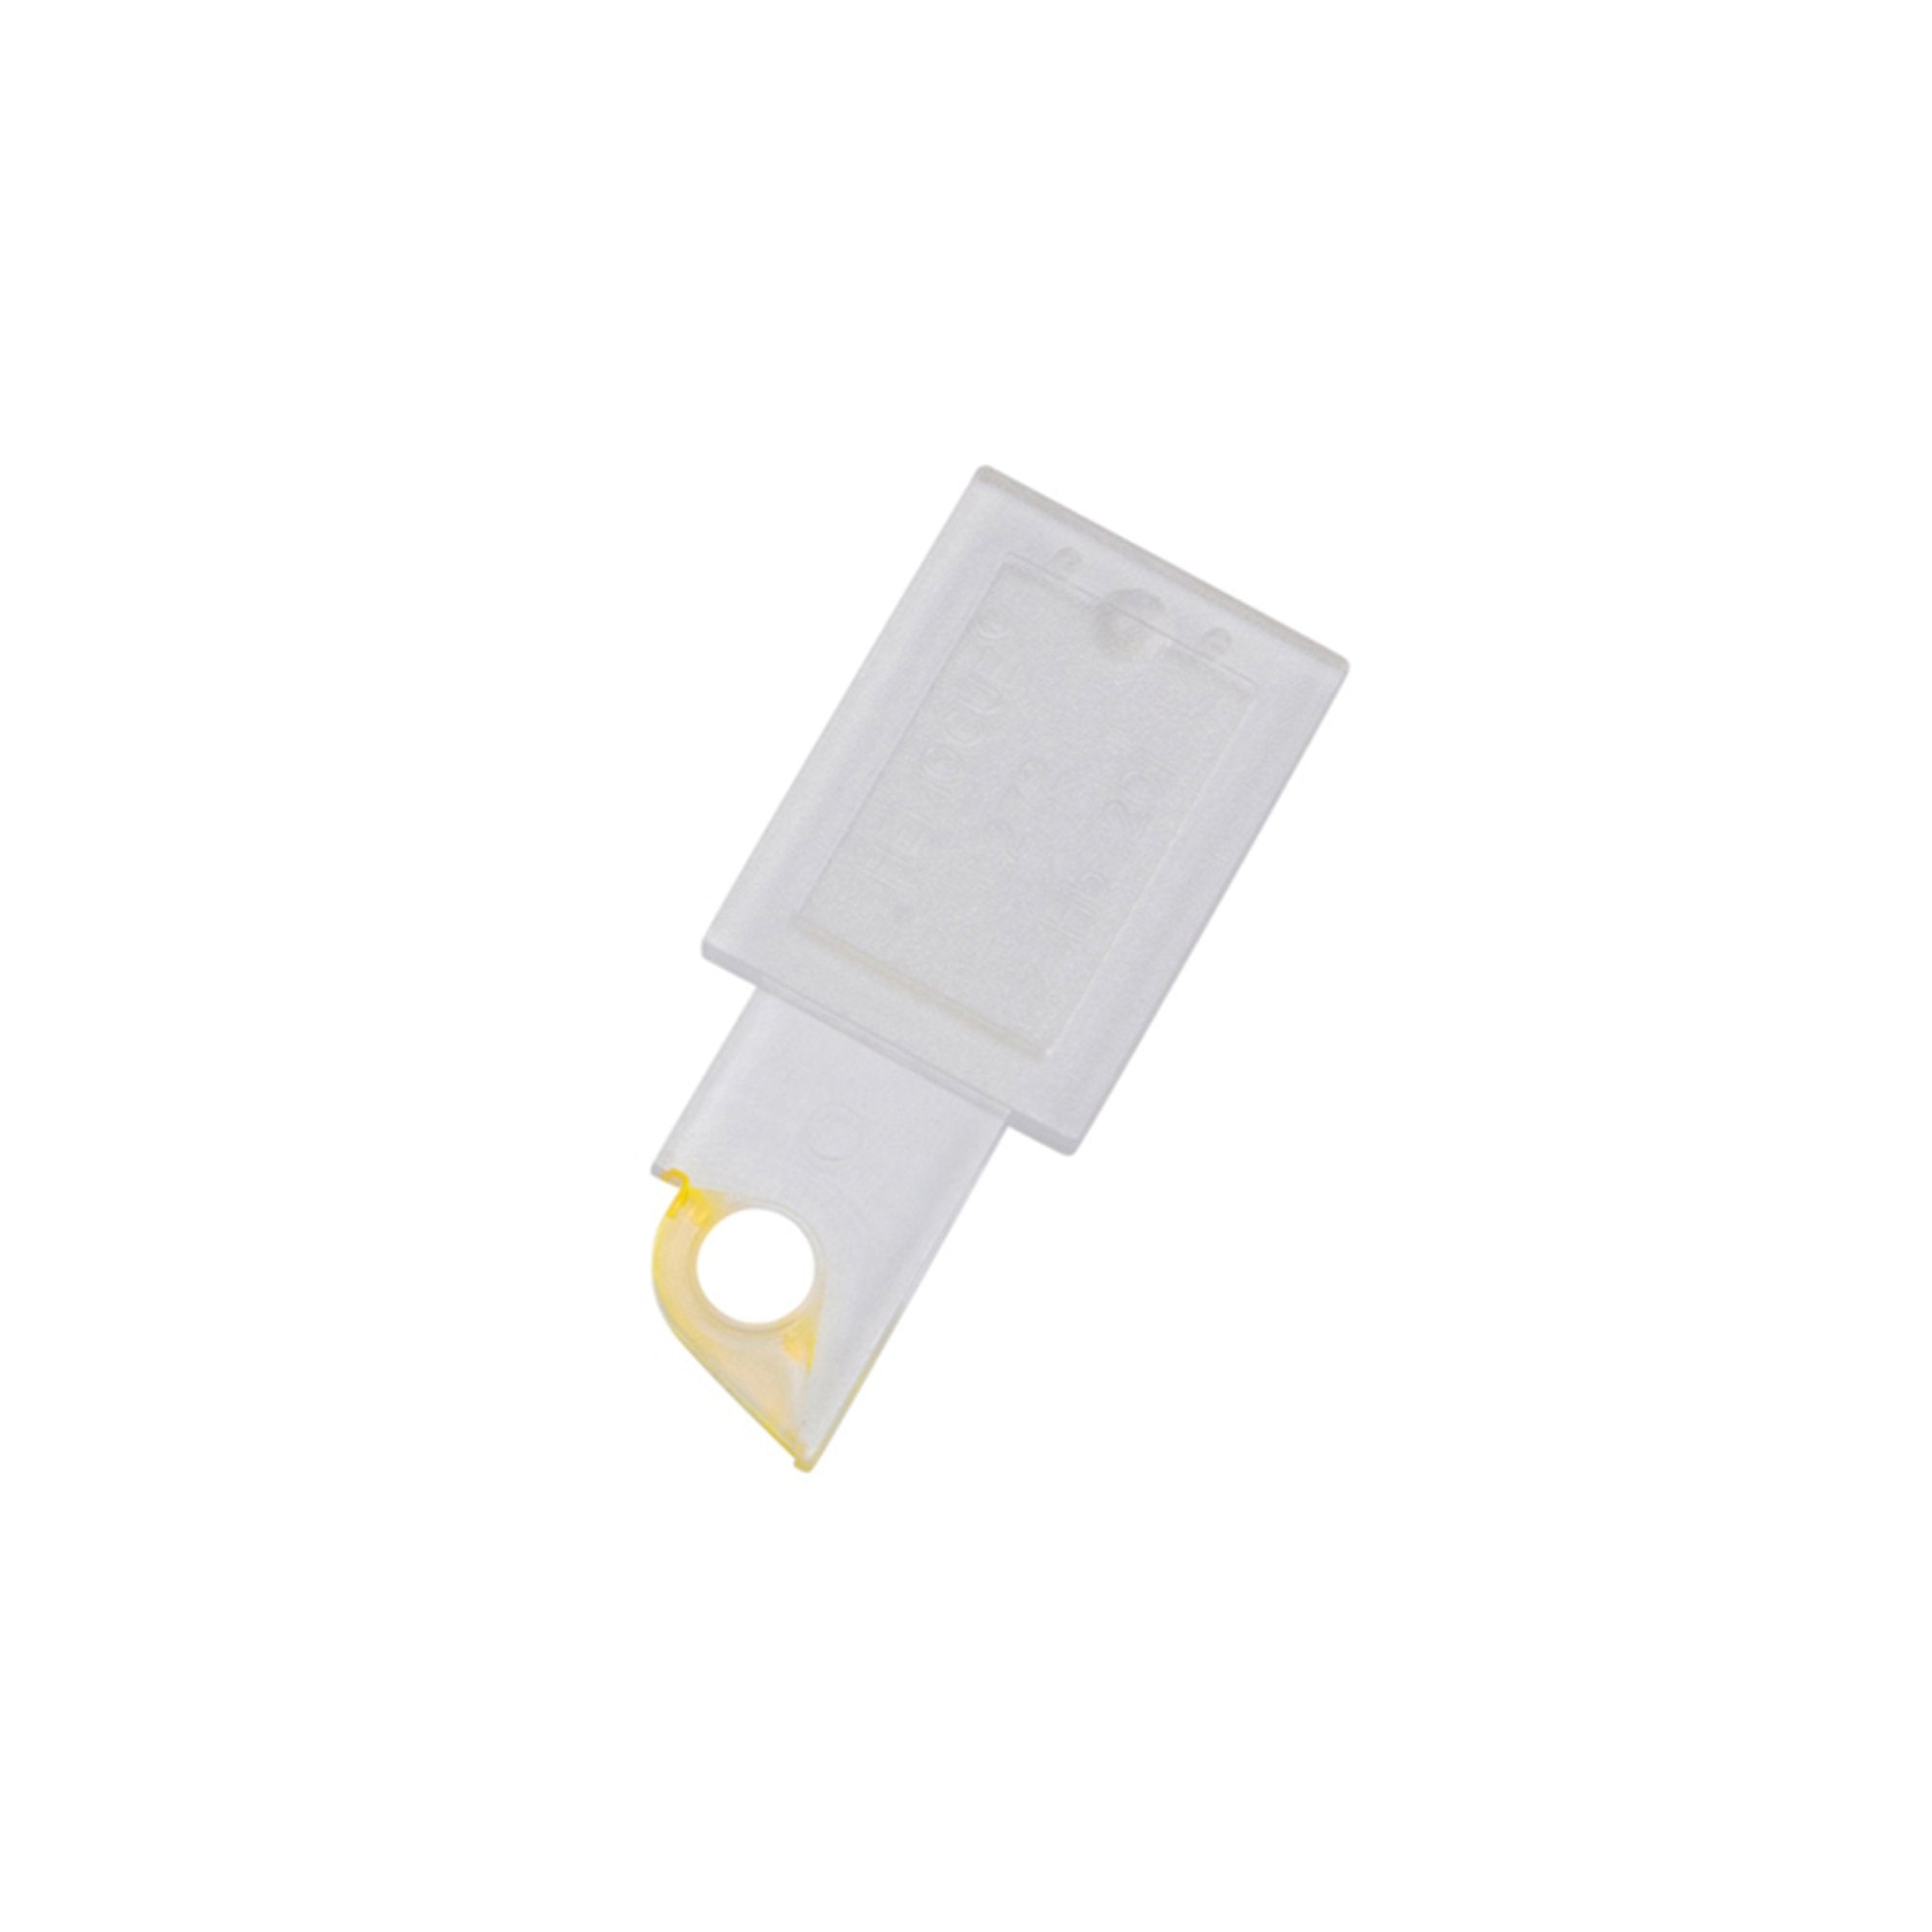 HemoCue? Hb 201 Microcuvette for use with HemoCue? Photometers